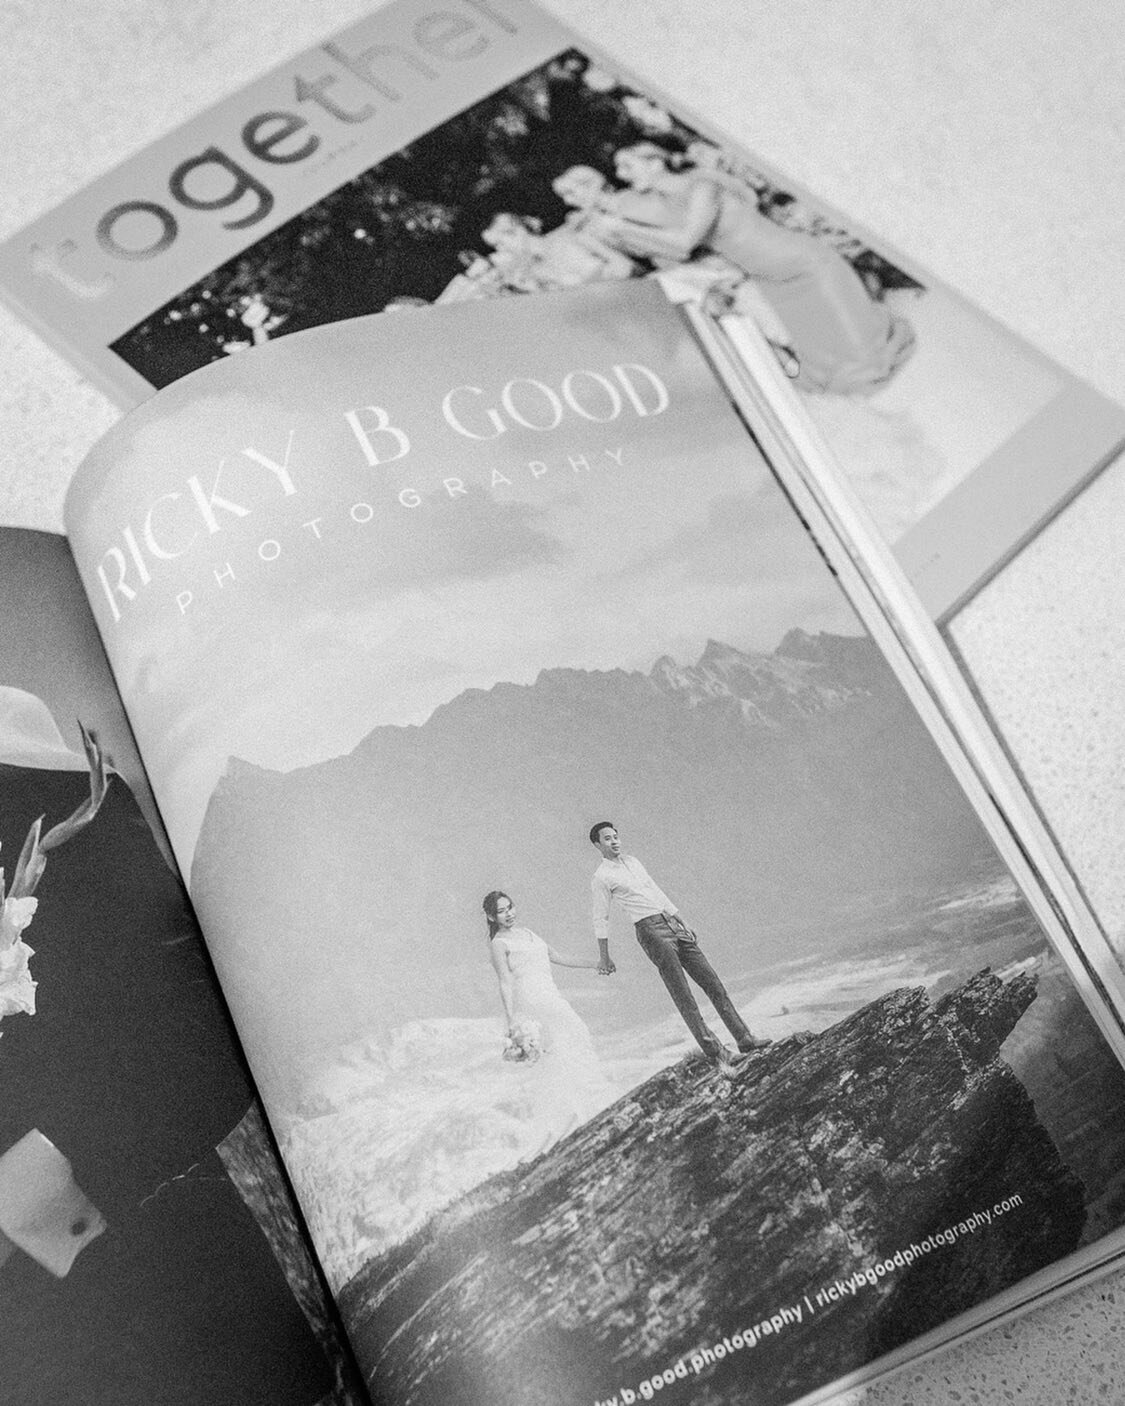 Absolutely stoked to be featured in the latest edition of @togetherjournal 
.
.
.
#togetherjournal 
#queenstownphotography
#queenstownweddingphotographer
#queenstownweddingphotography 
#queenstownweddingvideographer
#newzealandweddingphotography
#new